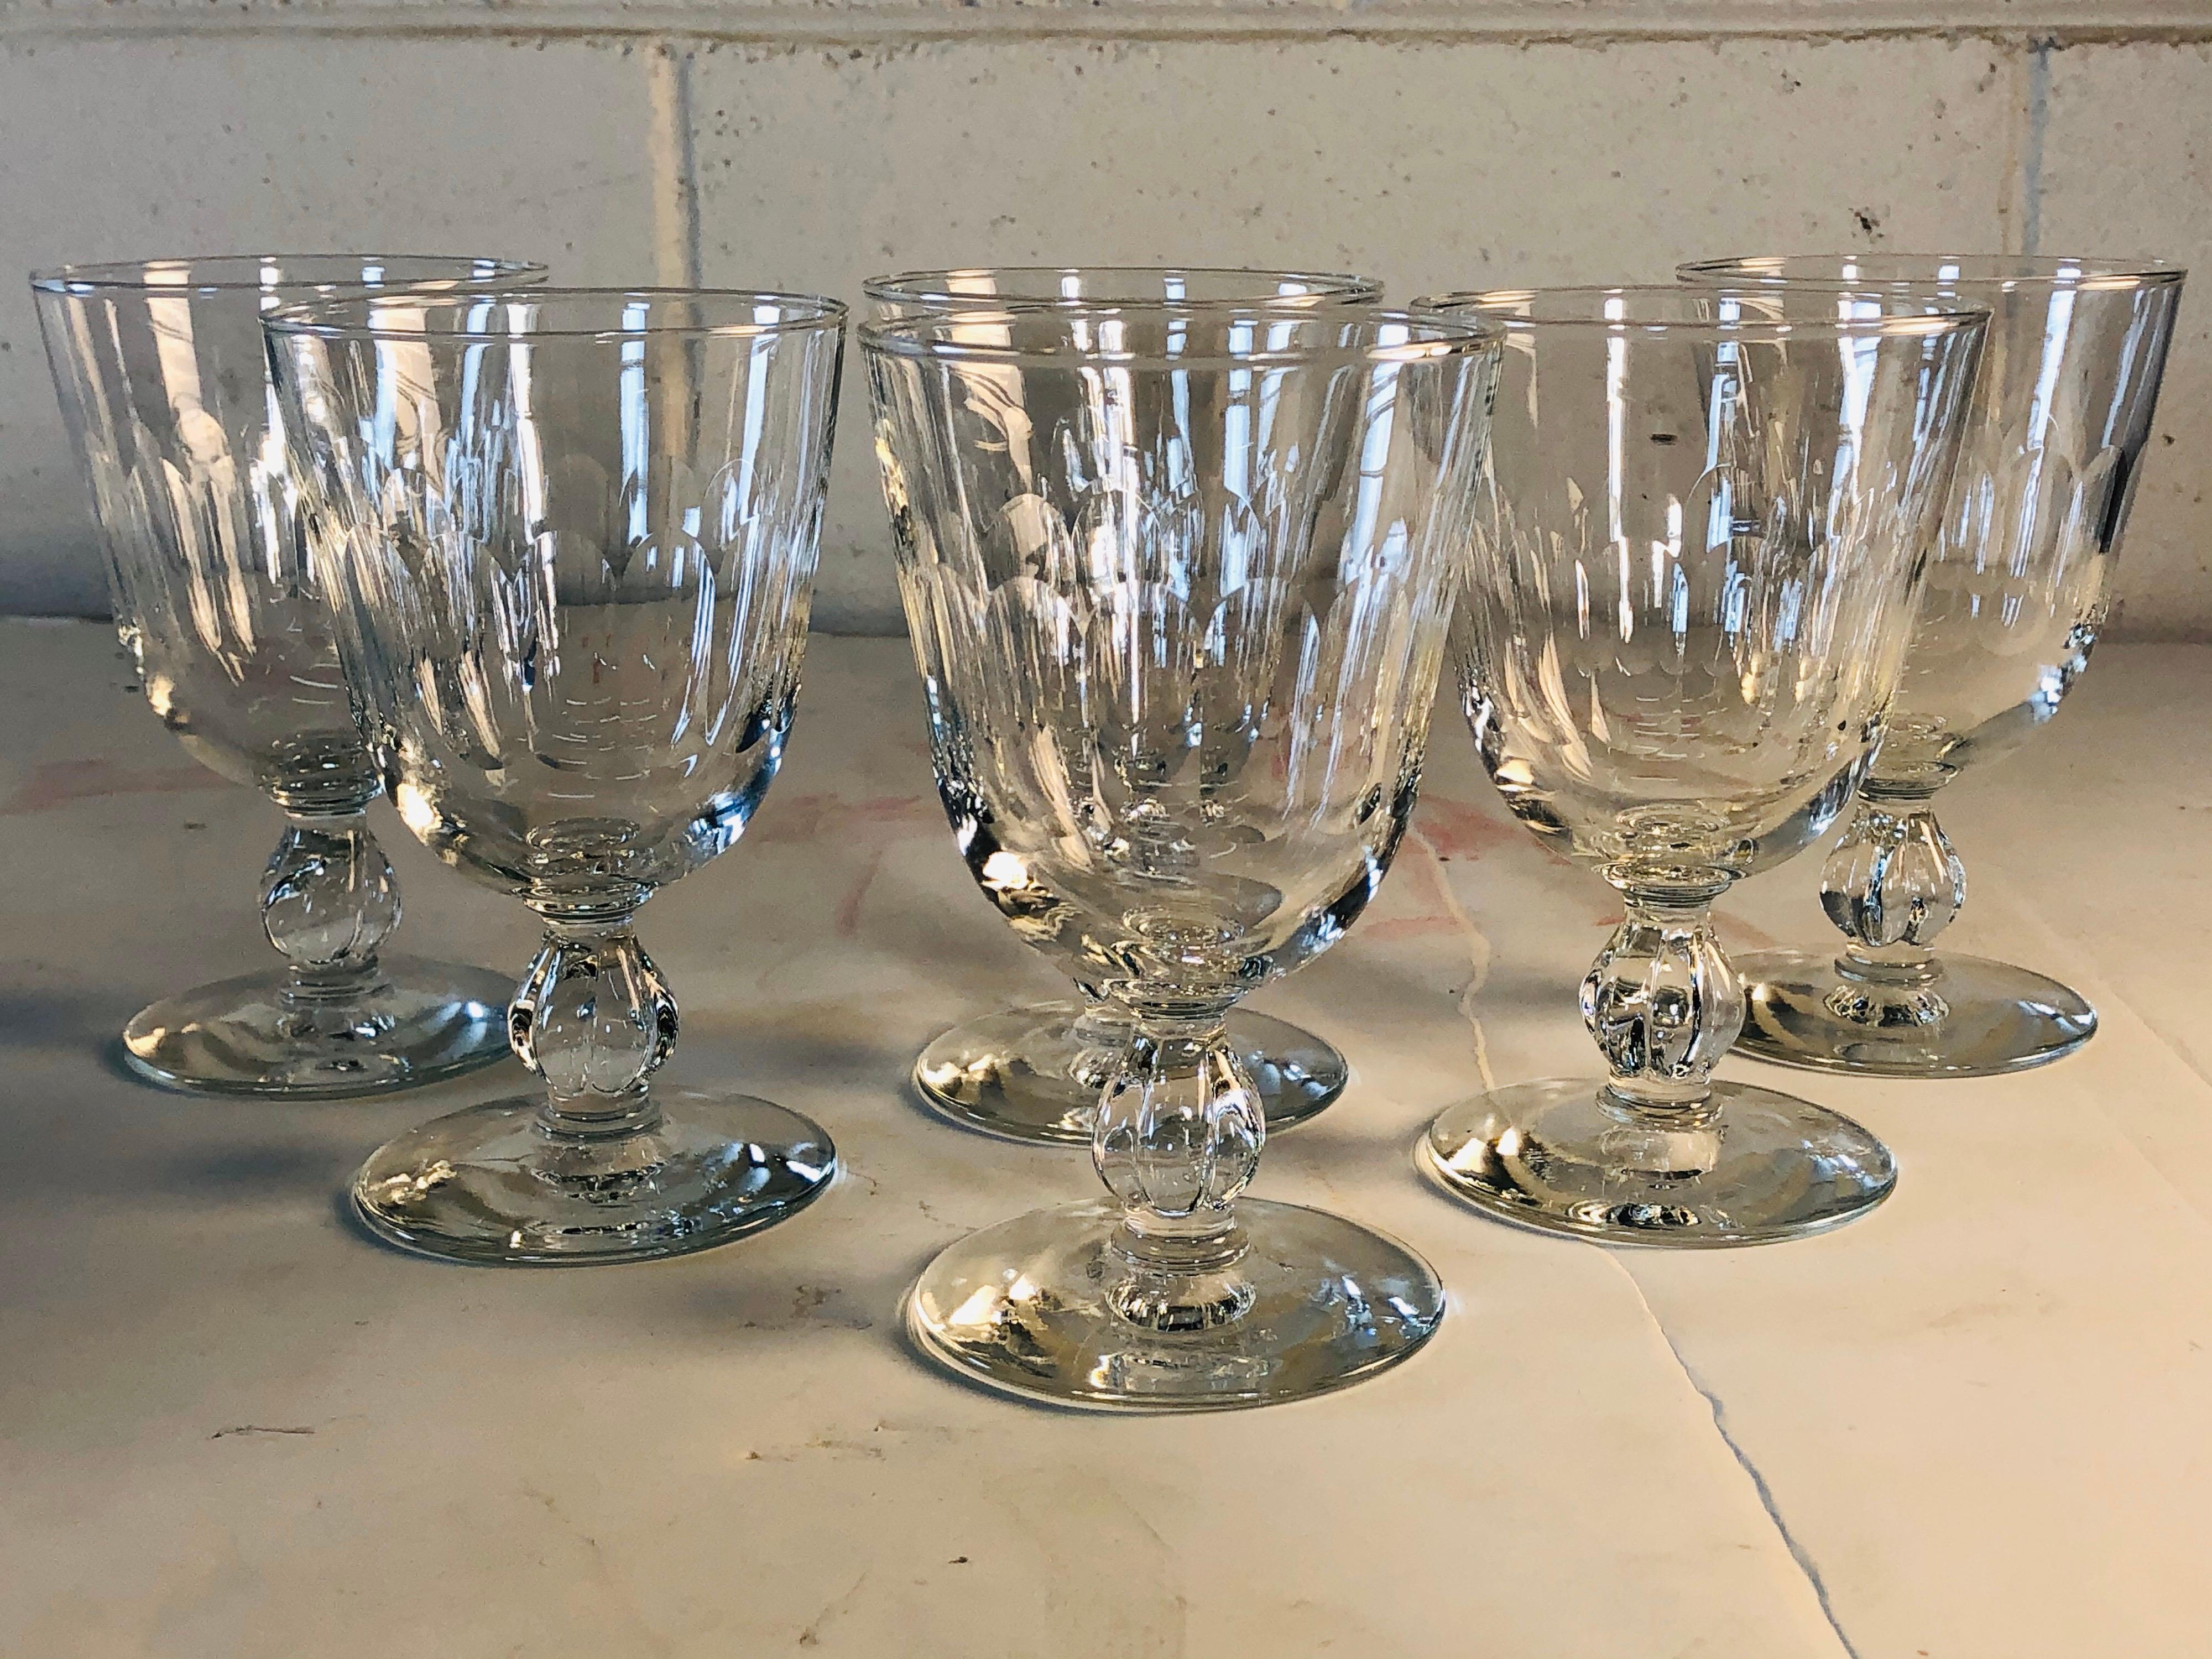 Vintage 1950s set of 6 mitred glasses wine stems. All handcut and polished. No marks. Excellent condition.
  